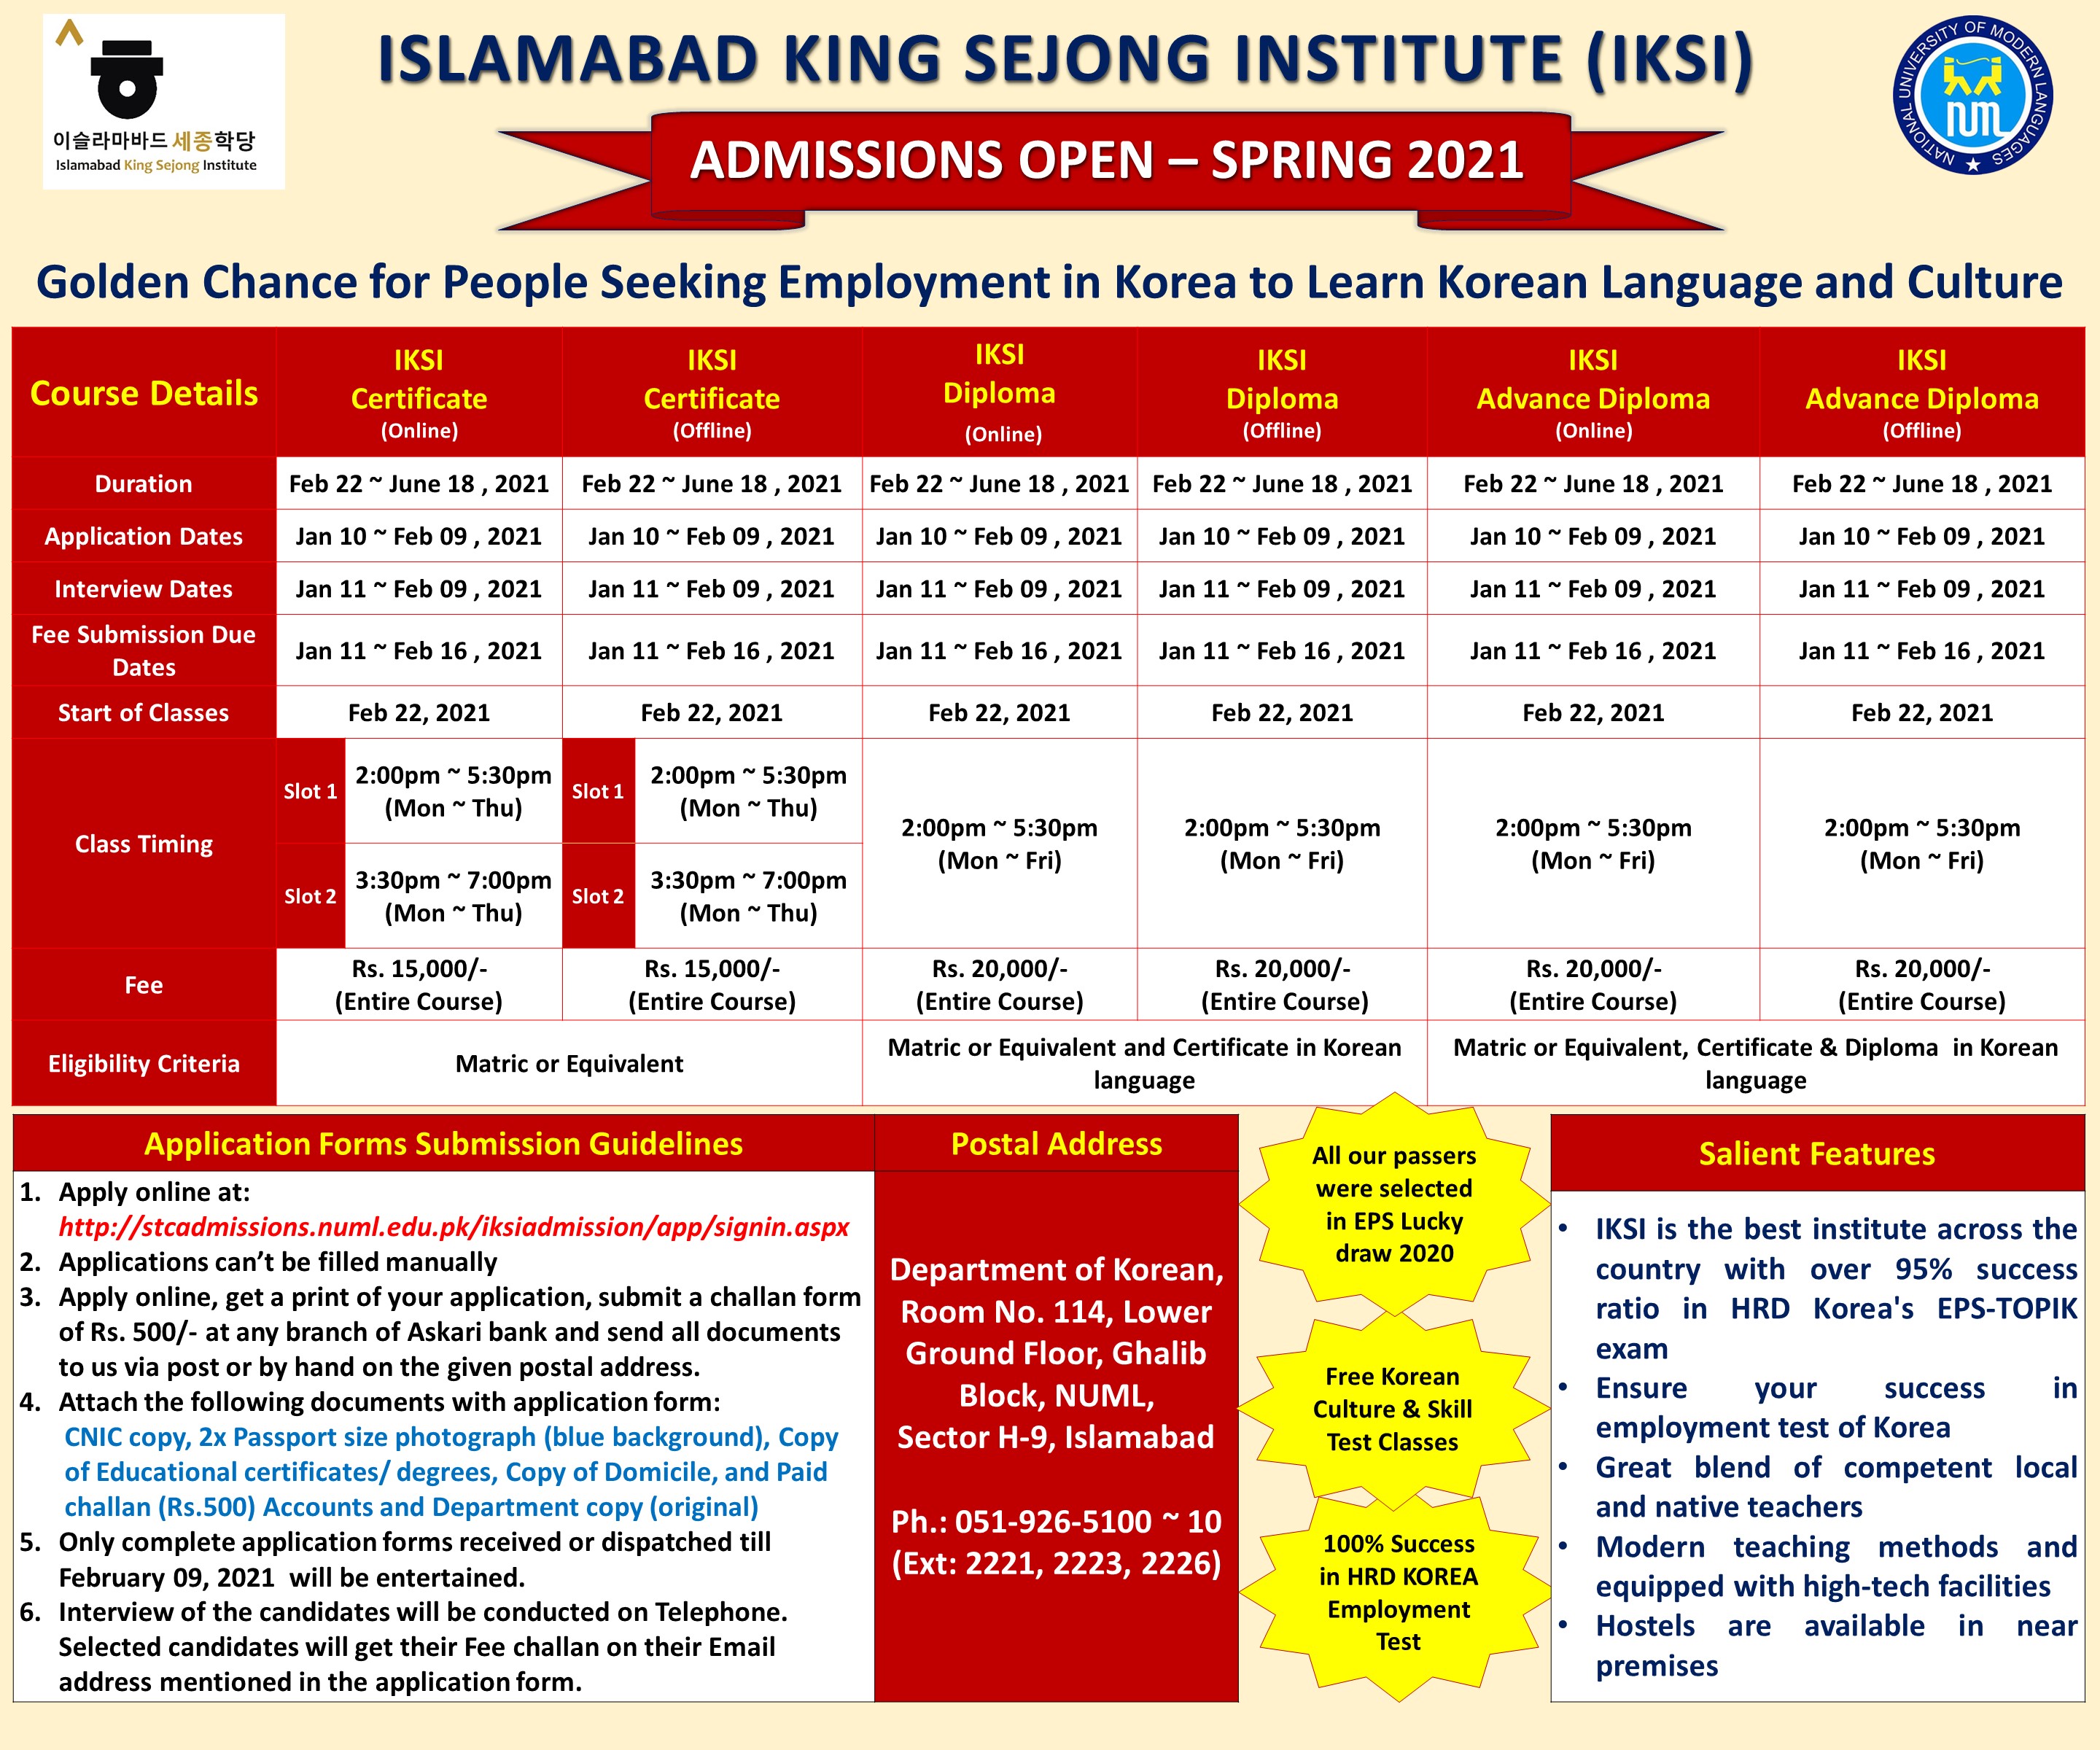 ISLAMABAD KING SEJONG INSTITUTE - SPRING 2021 ADMISSION OPEN